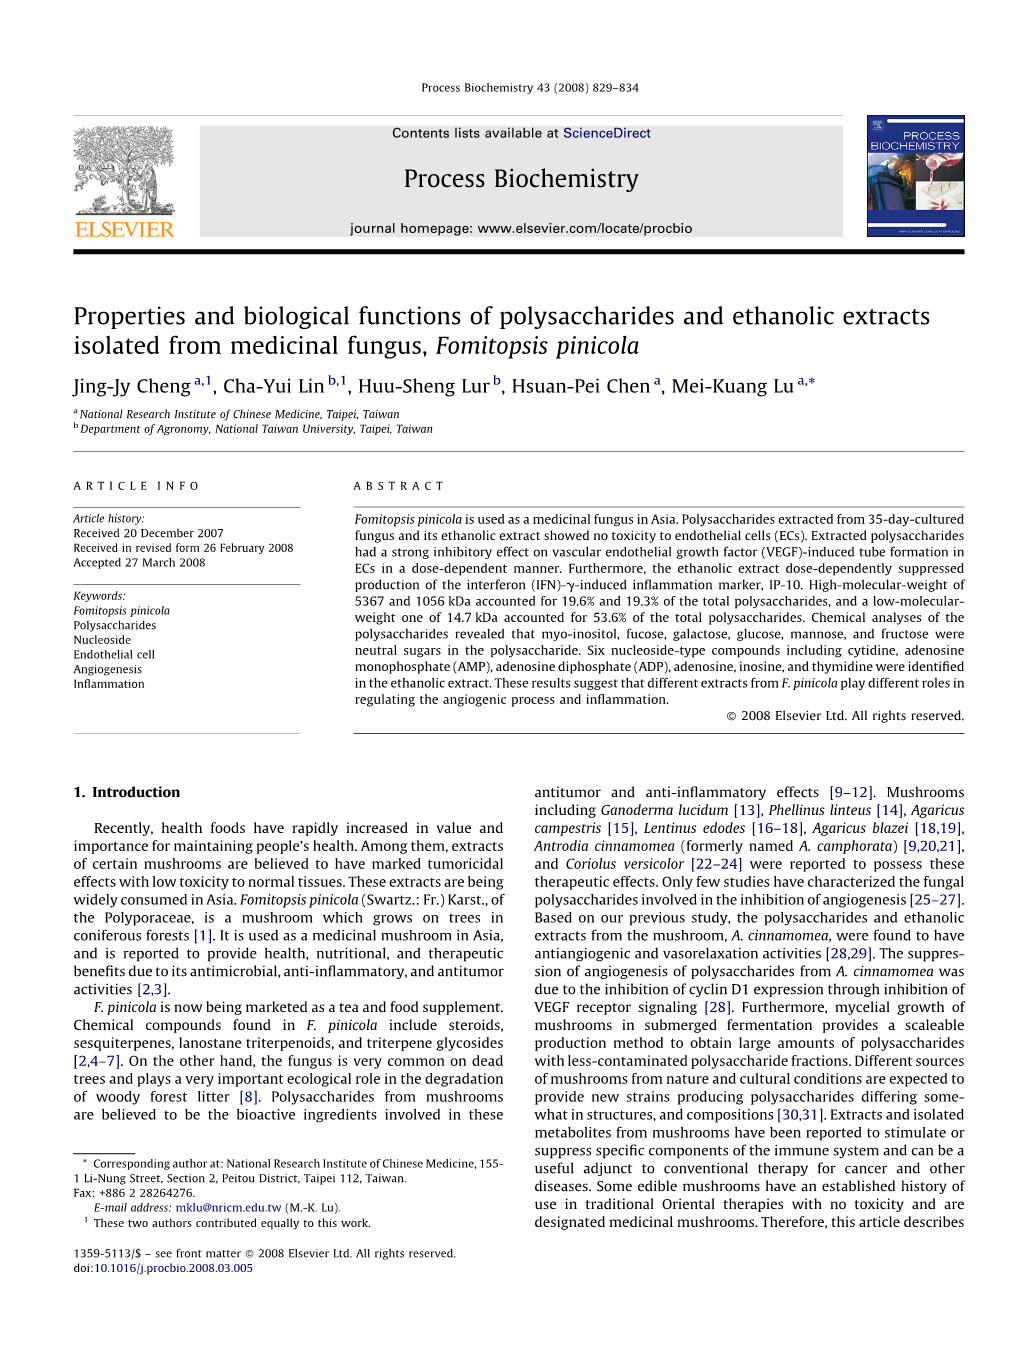 Properties and Biological Functions of Polysaccharides and Ethanolic Extracts Isolated from Medicinal Fungus, Fomitopsis Pinicola